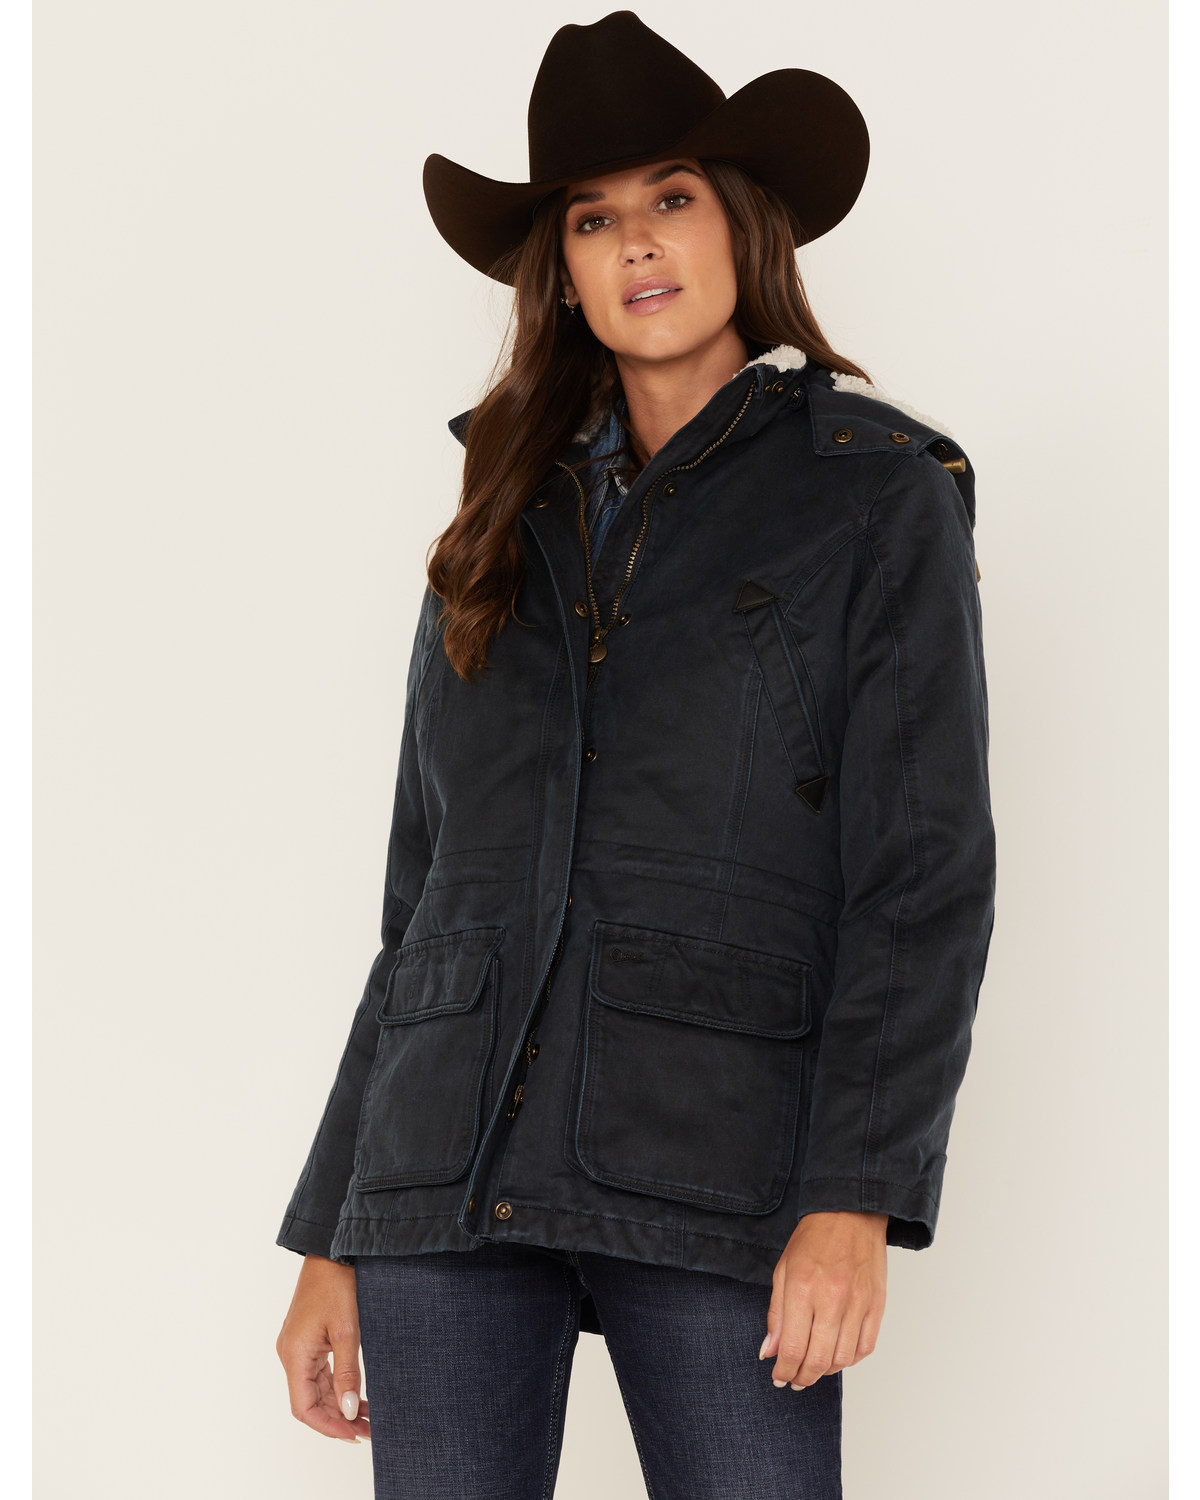 Outback Trading Co. Women's Woodbury Sherpa-Lined Hooded Jacket